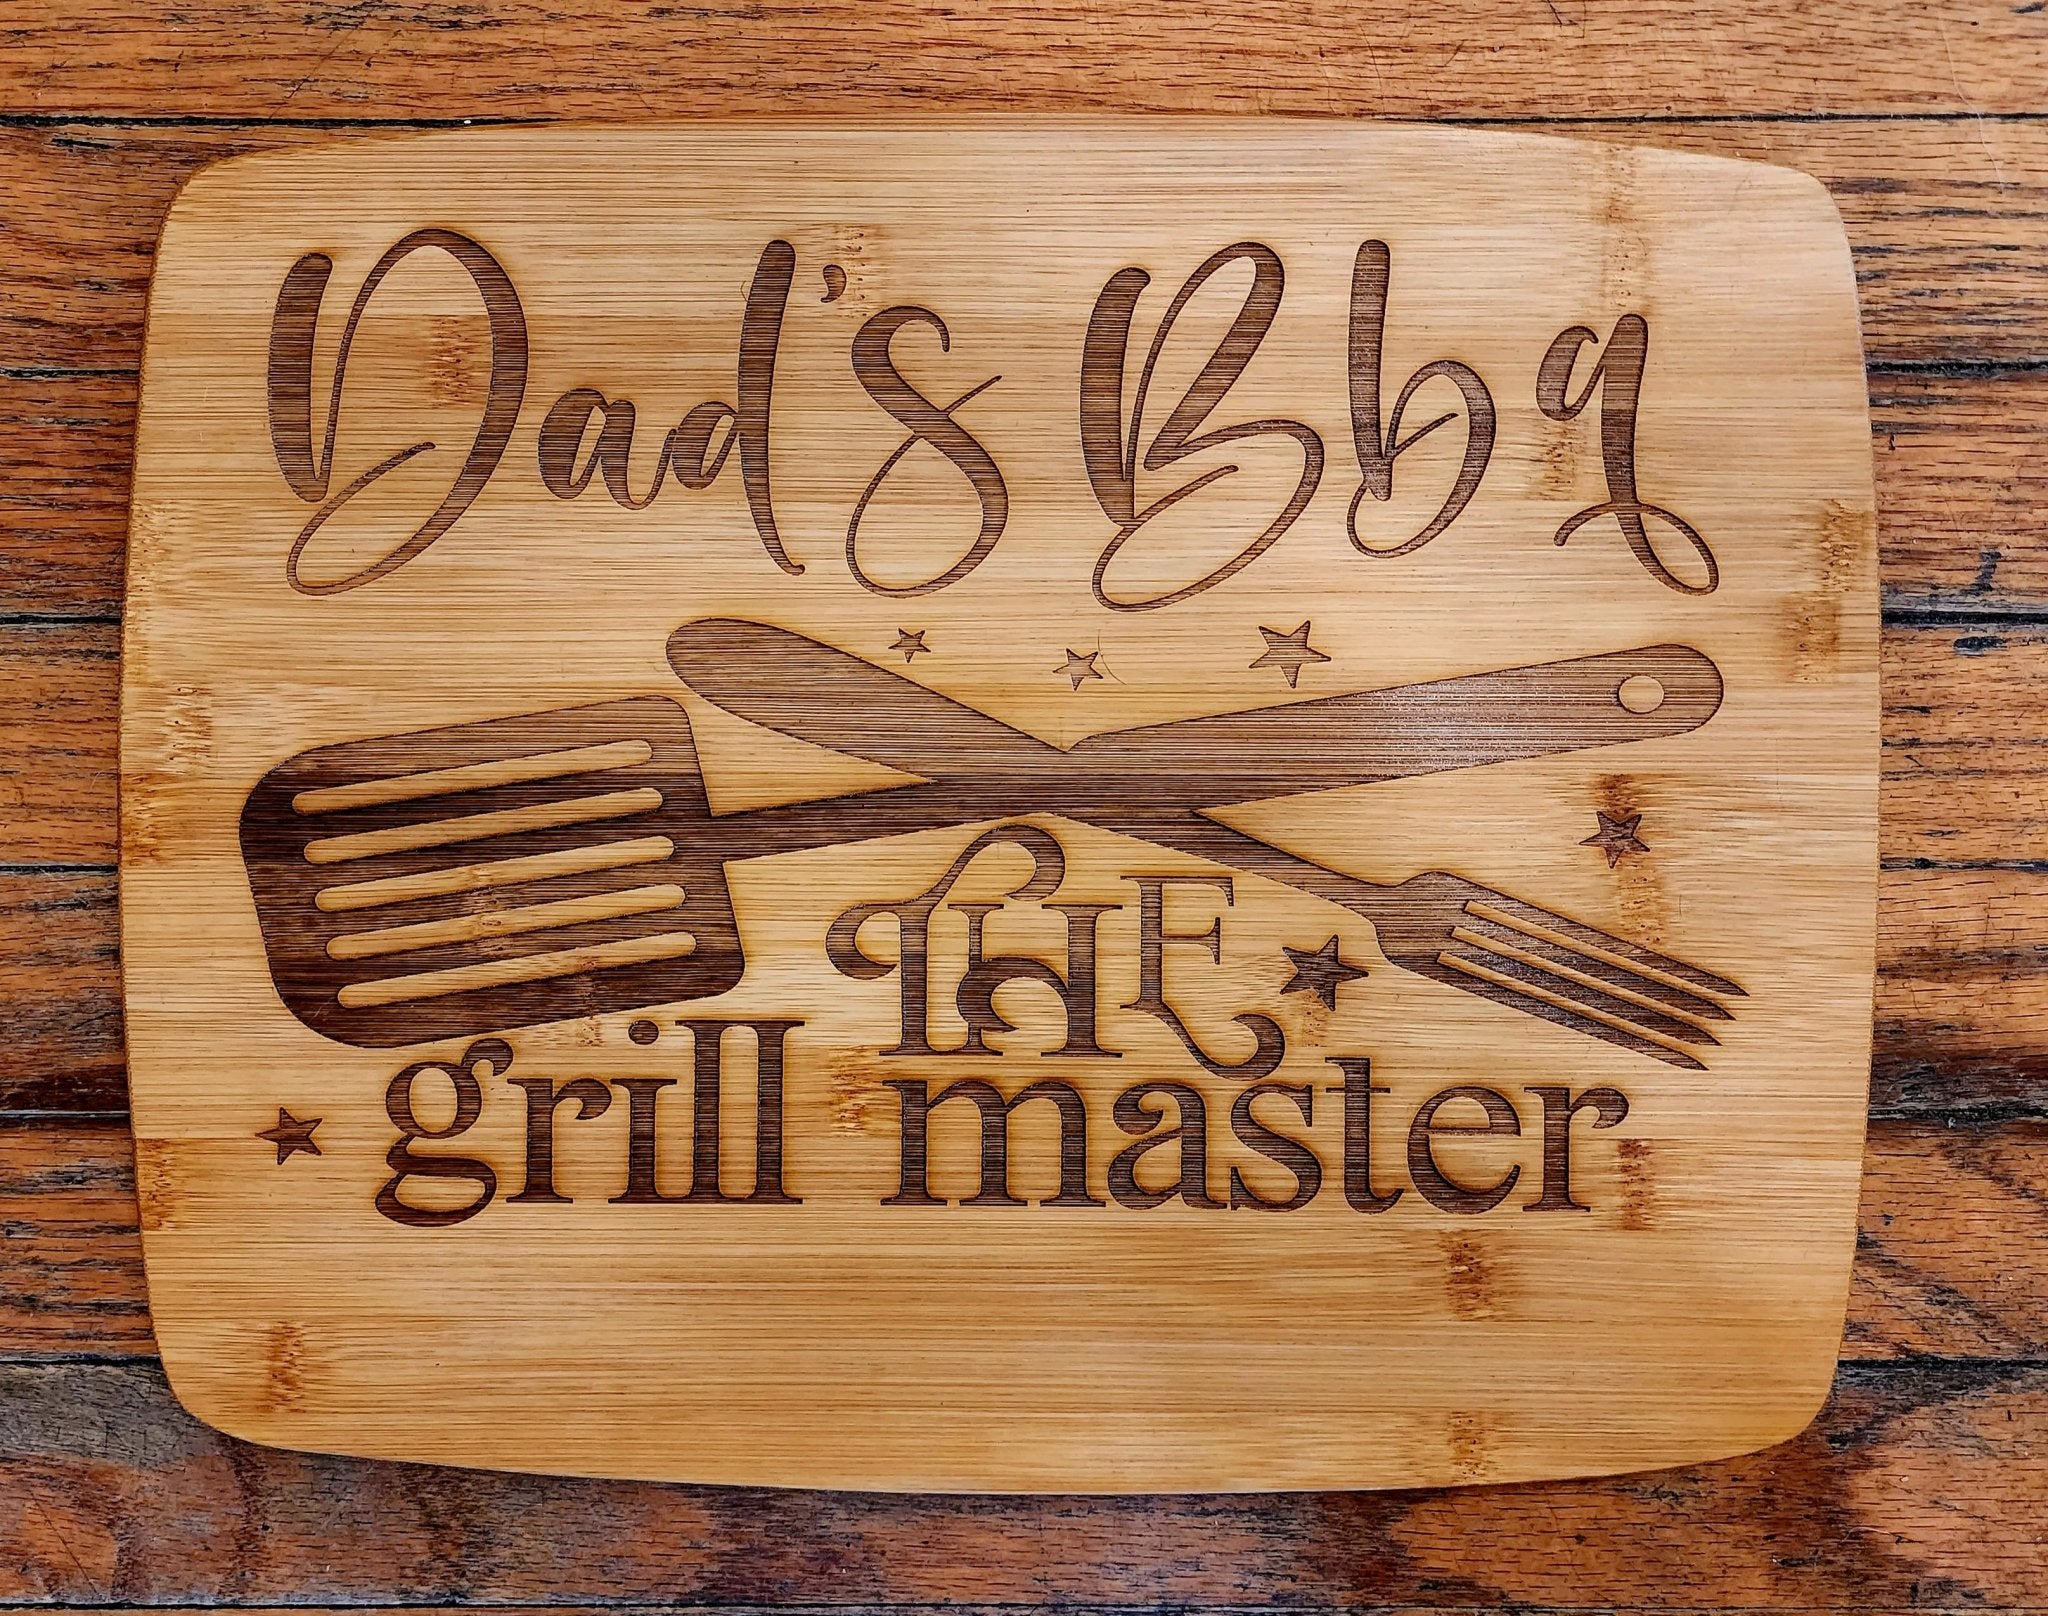 MOTHER'S DAY PERSONALIZED gift,Mom's custom cutting board